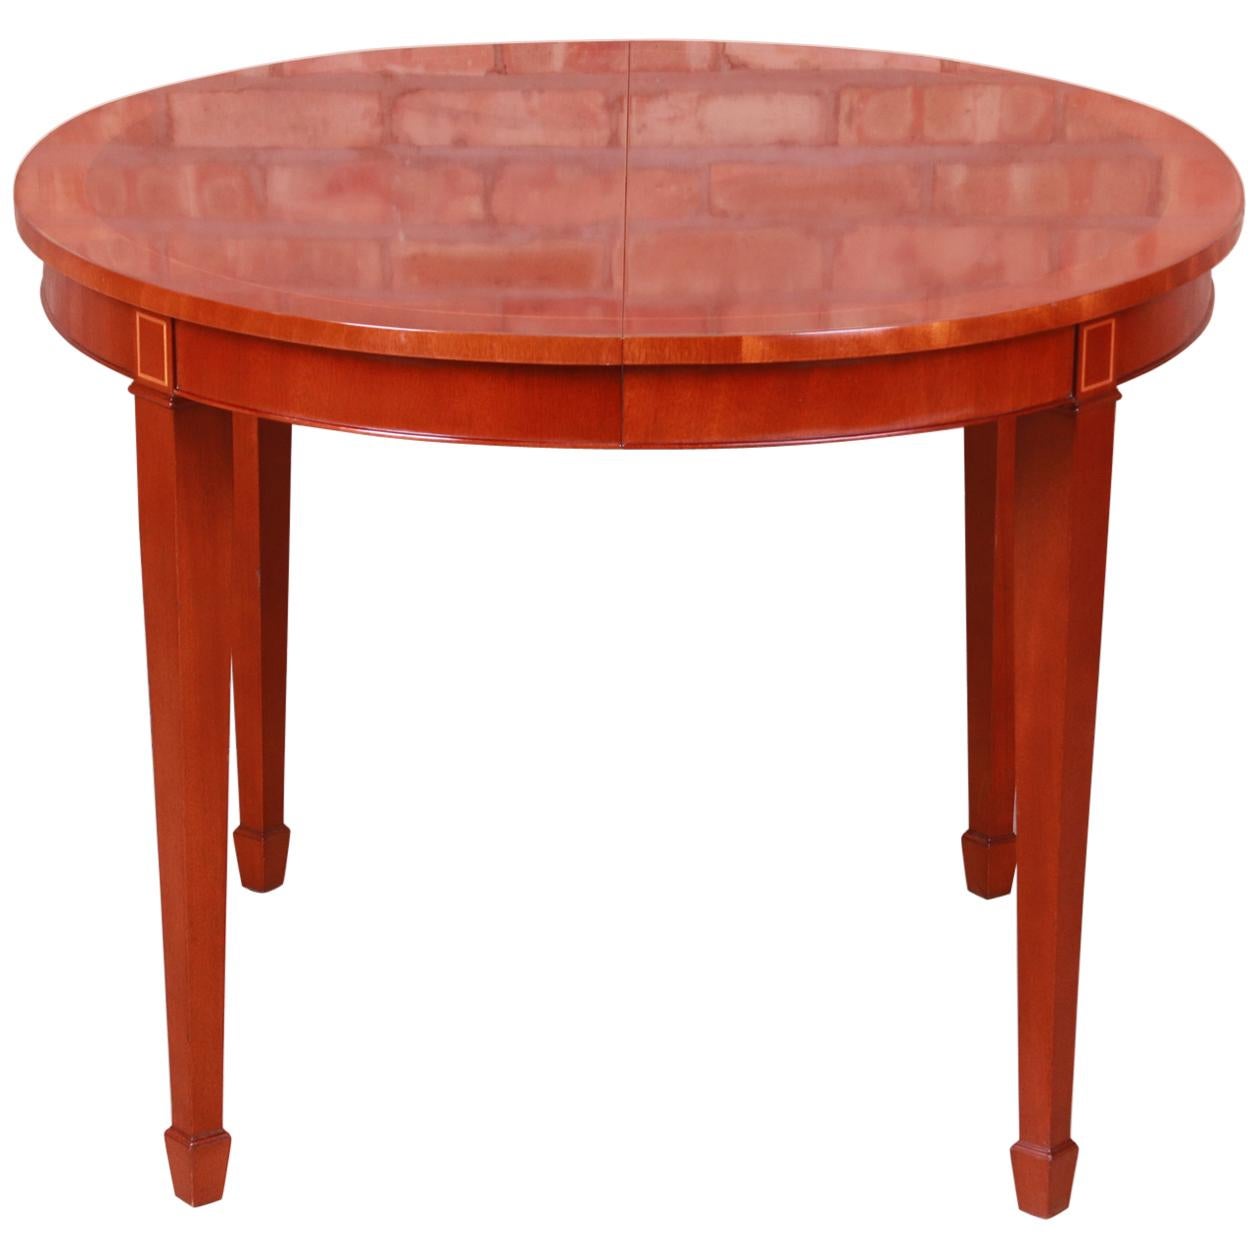 Kindel Furniture Federal Style Banded Mahogany Extension Dining or Game Table